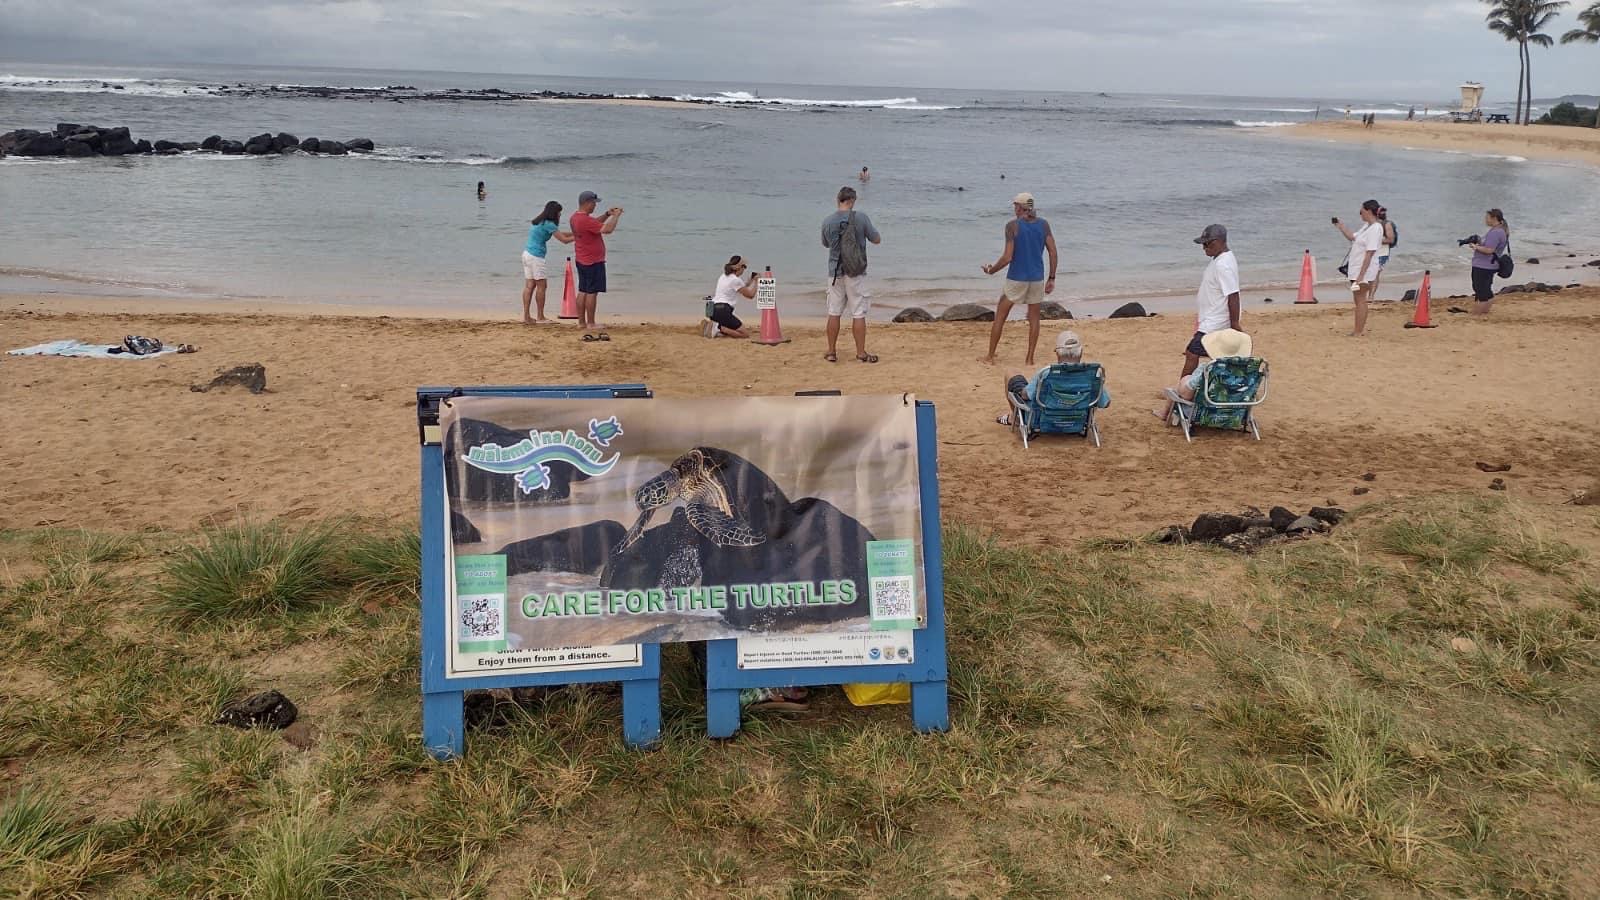 People at beach with care for turtles sign board